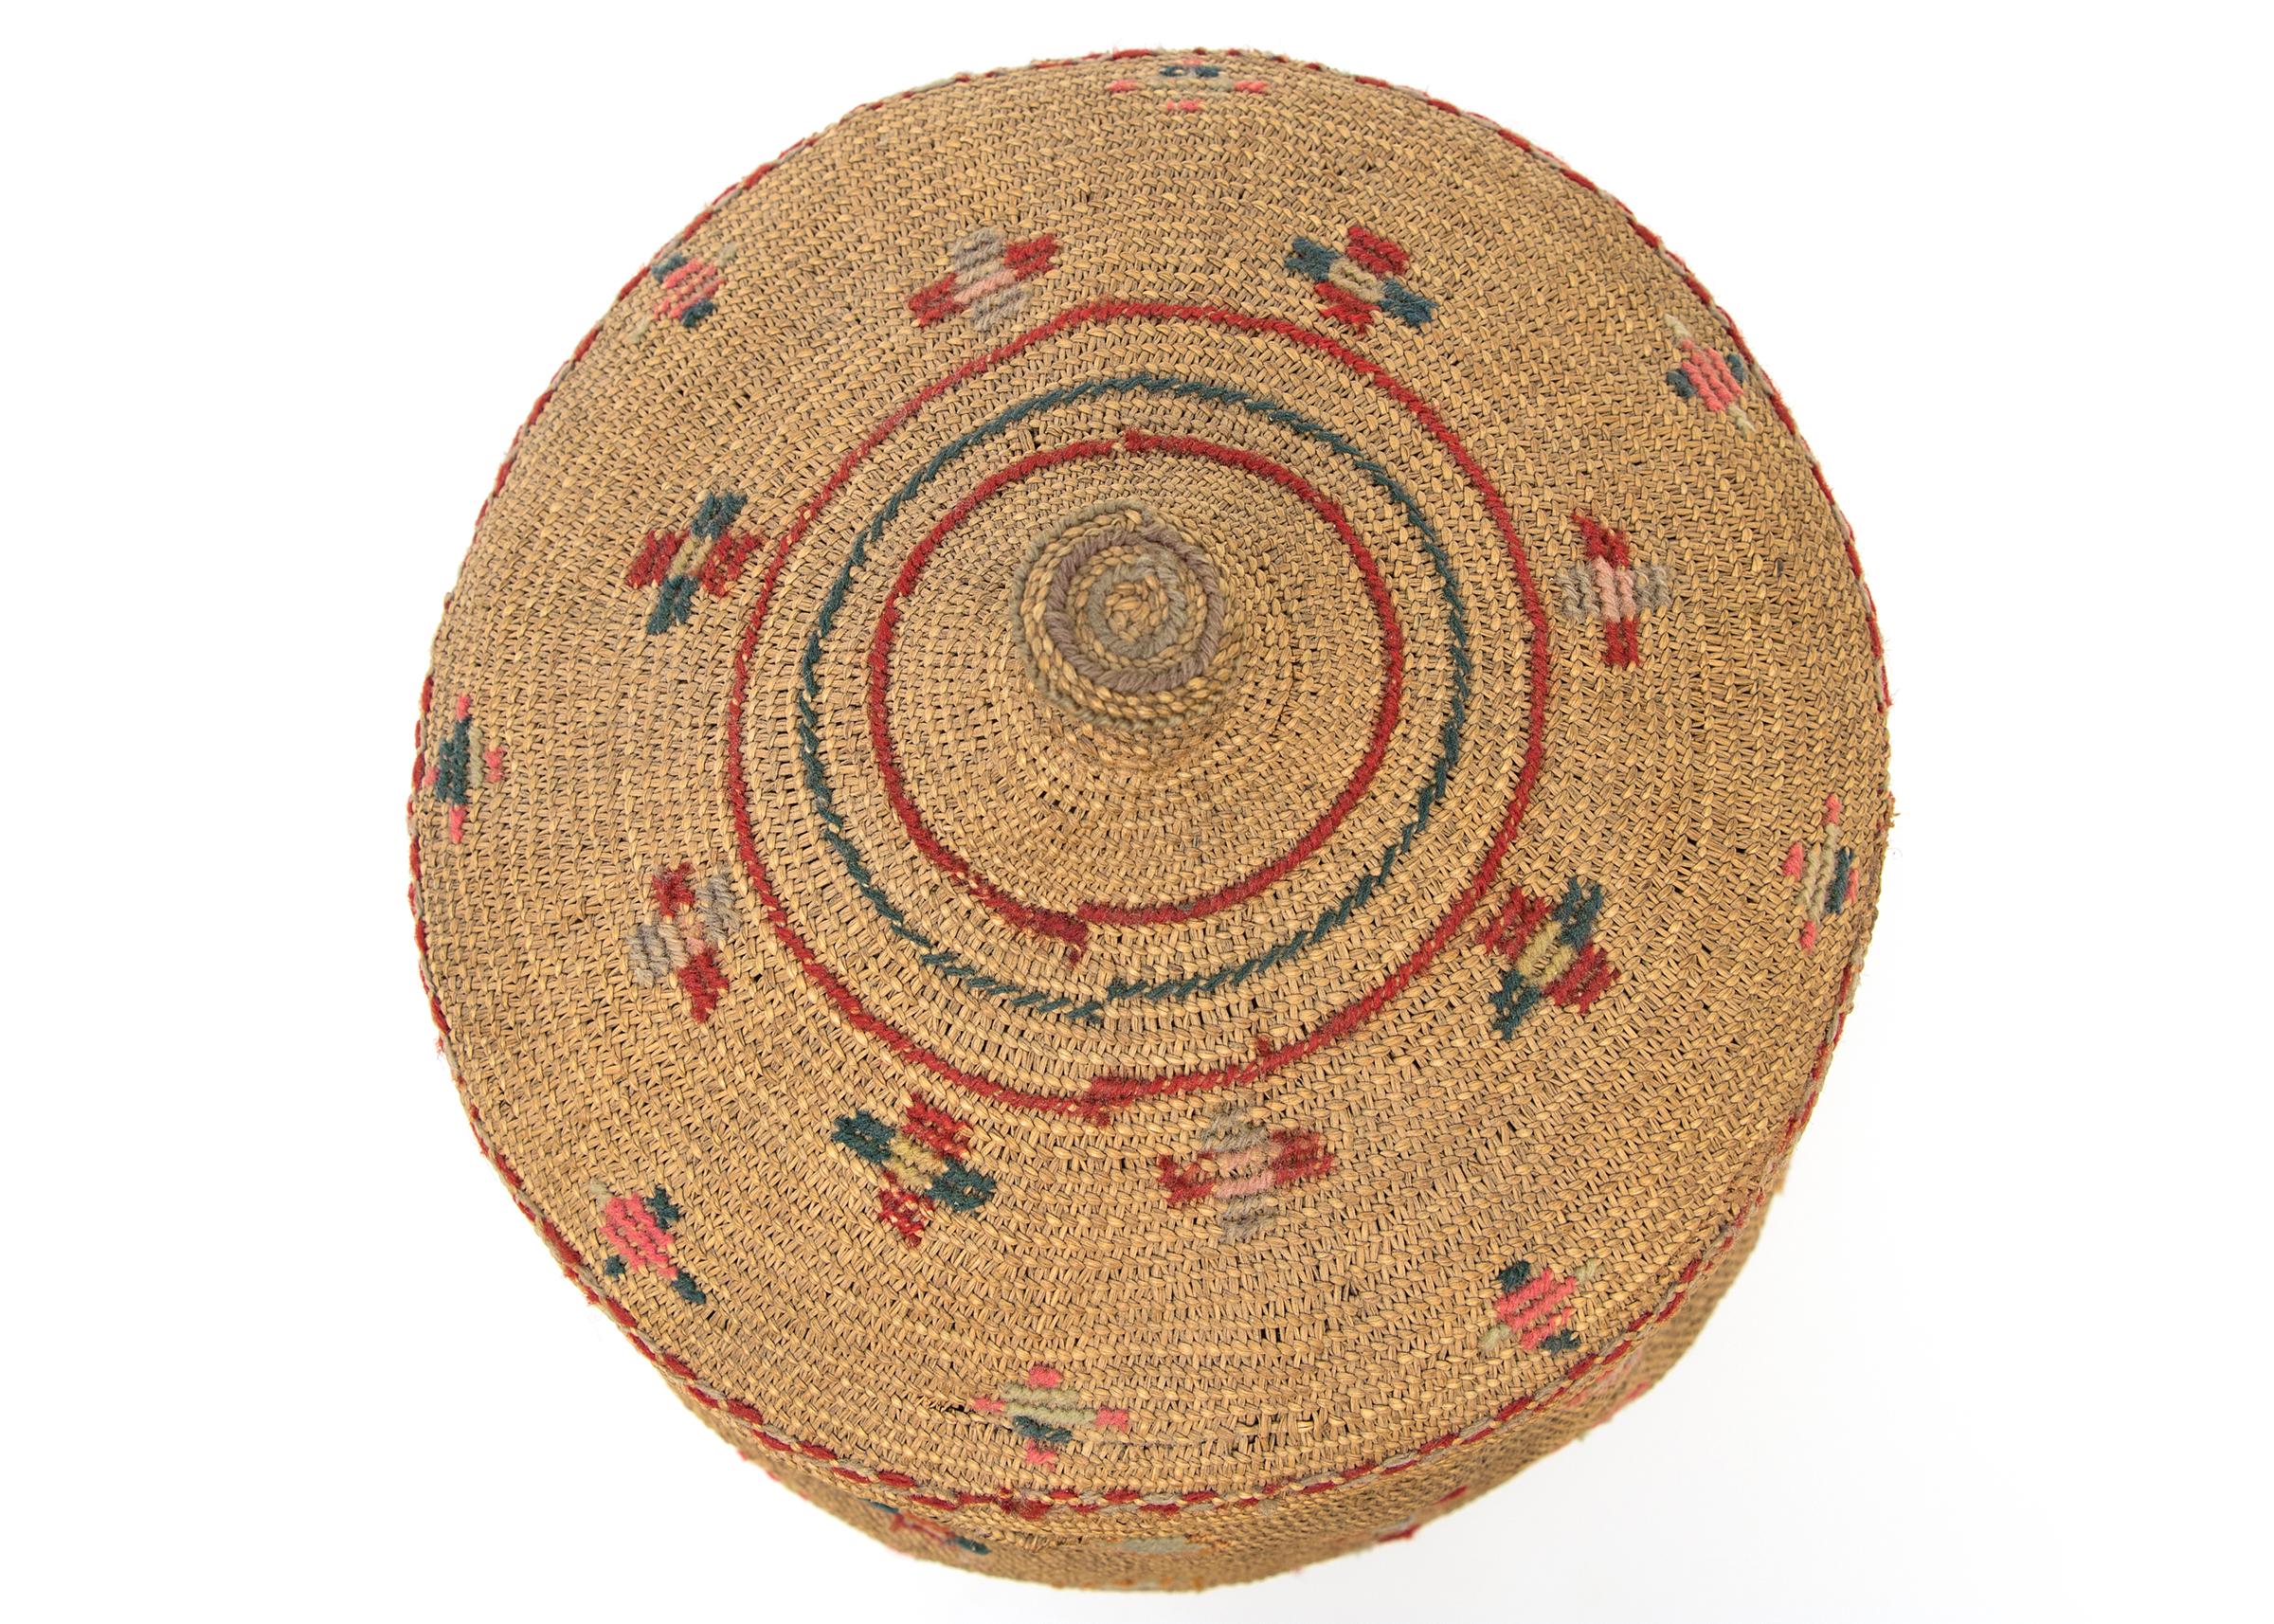 20th Century Northwest Coast 1900 Woven Basket with Top, Multicolor Cross Patterns, Table Top For Sale